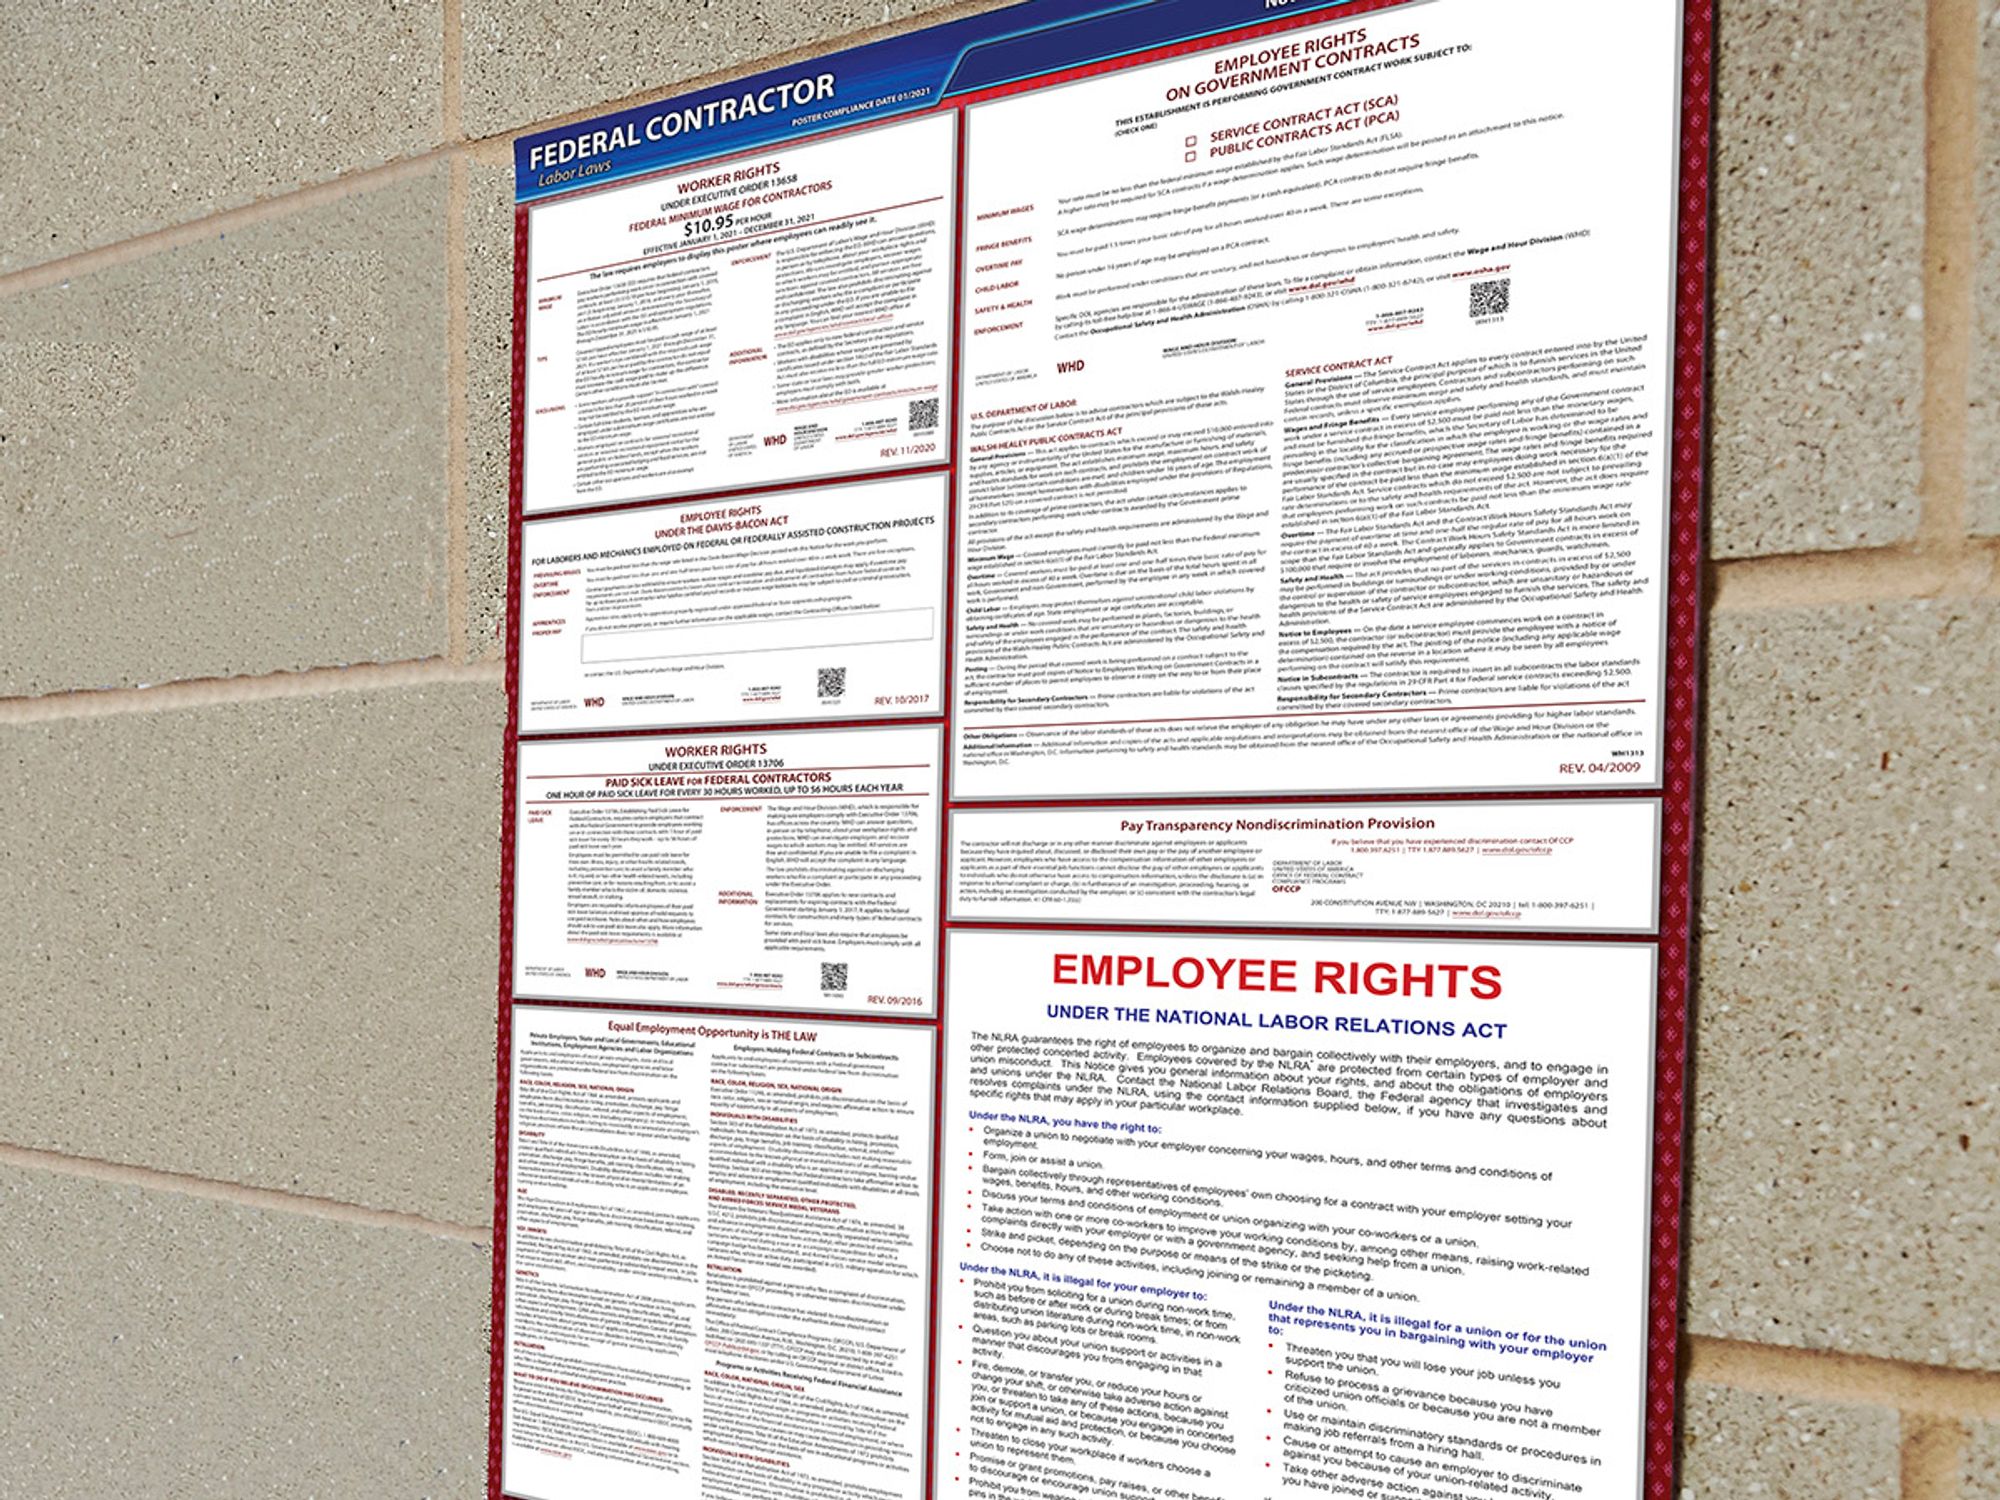 Posters for federal contractors